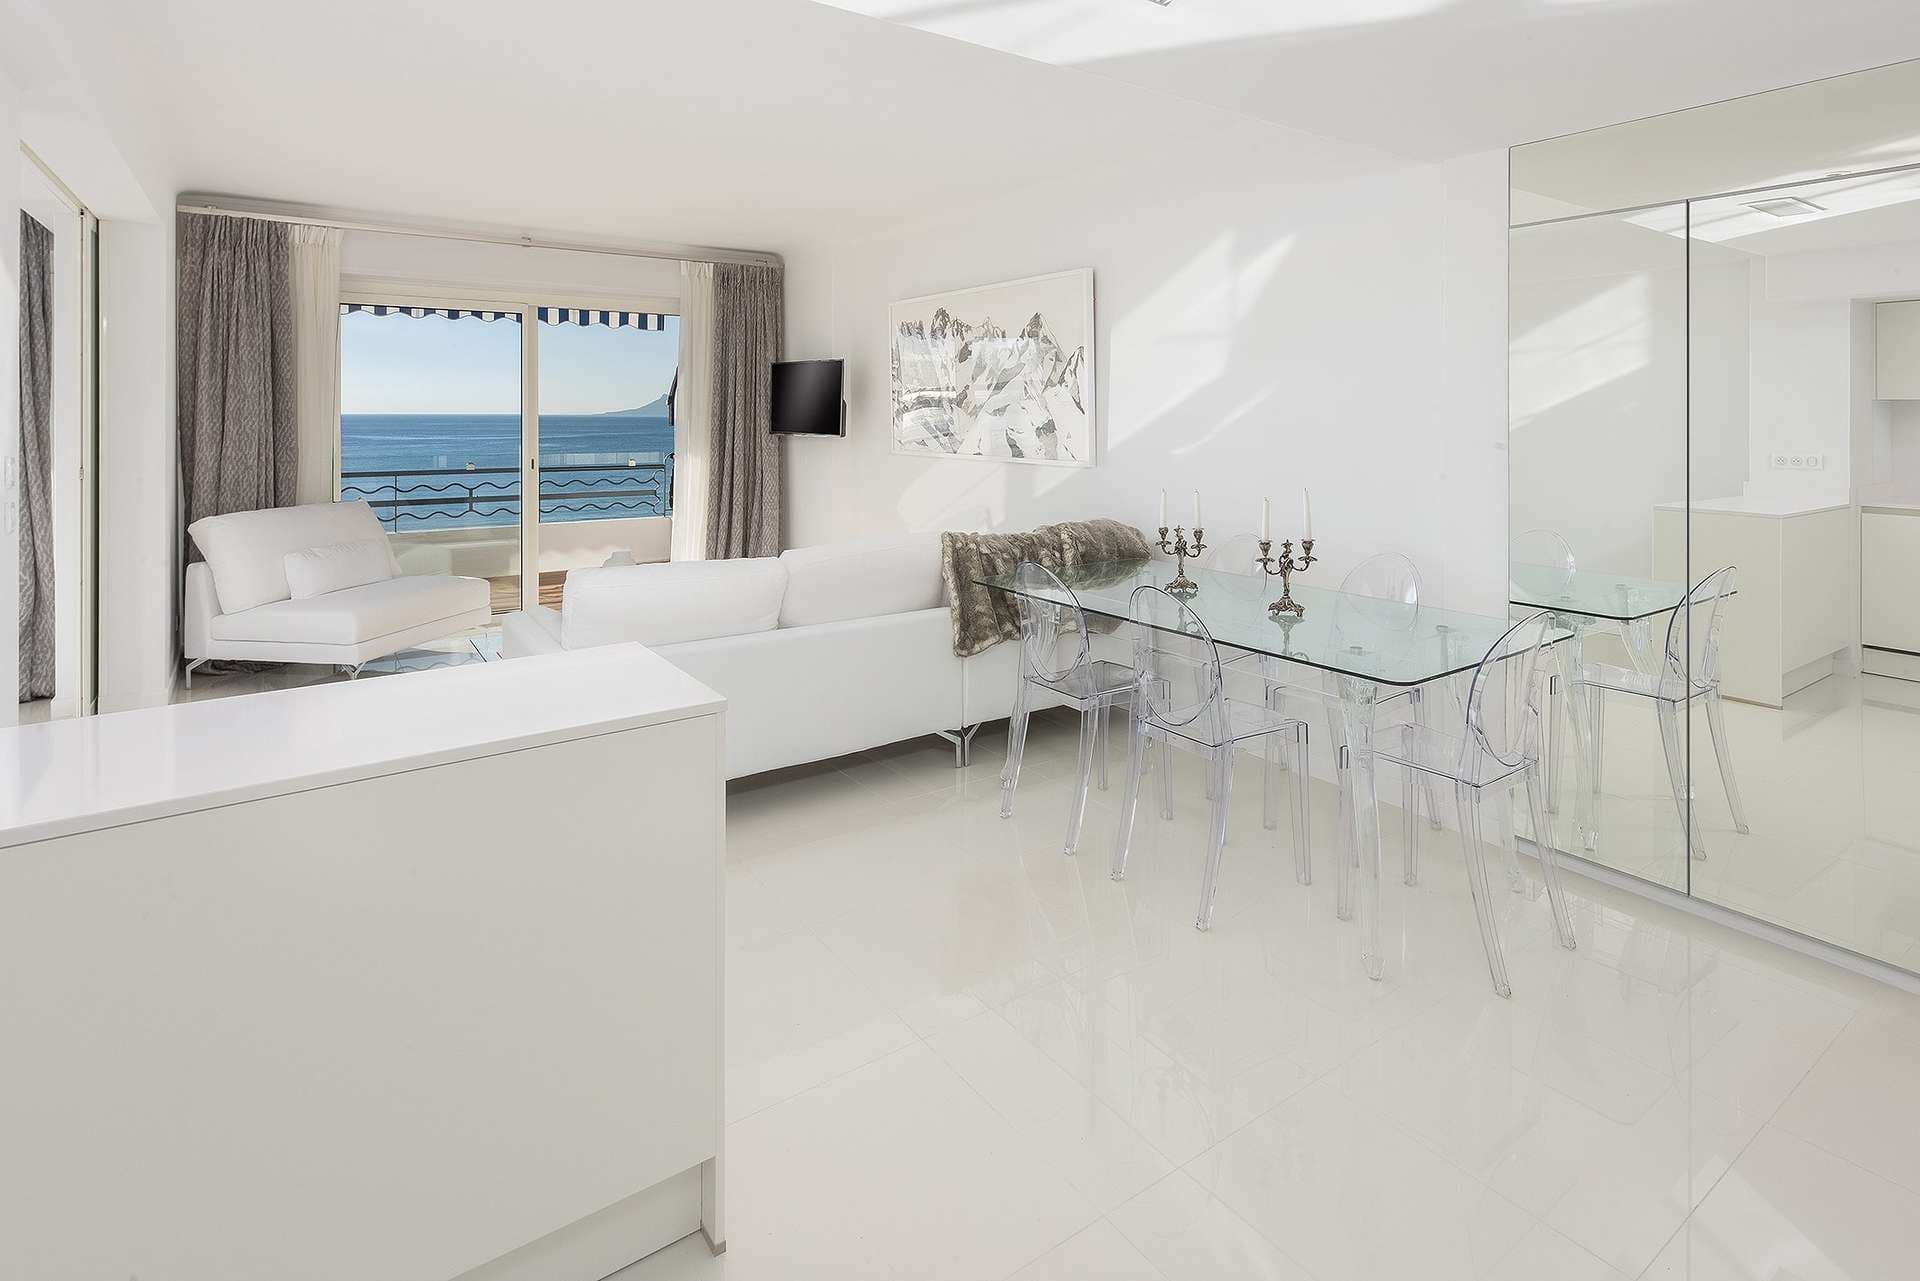 4 Bedroom Apartment For Sale Cannes Lp01016 25456256b7a7a600.jpg